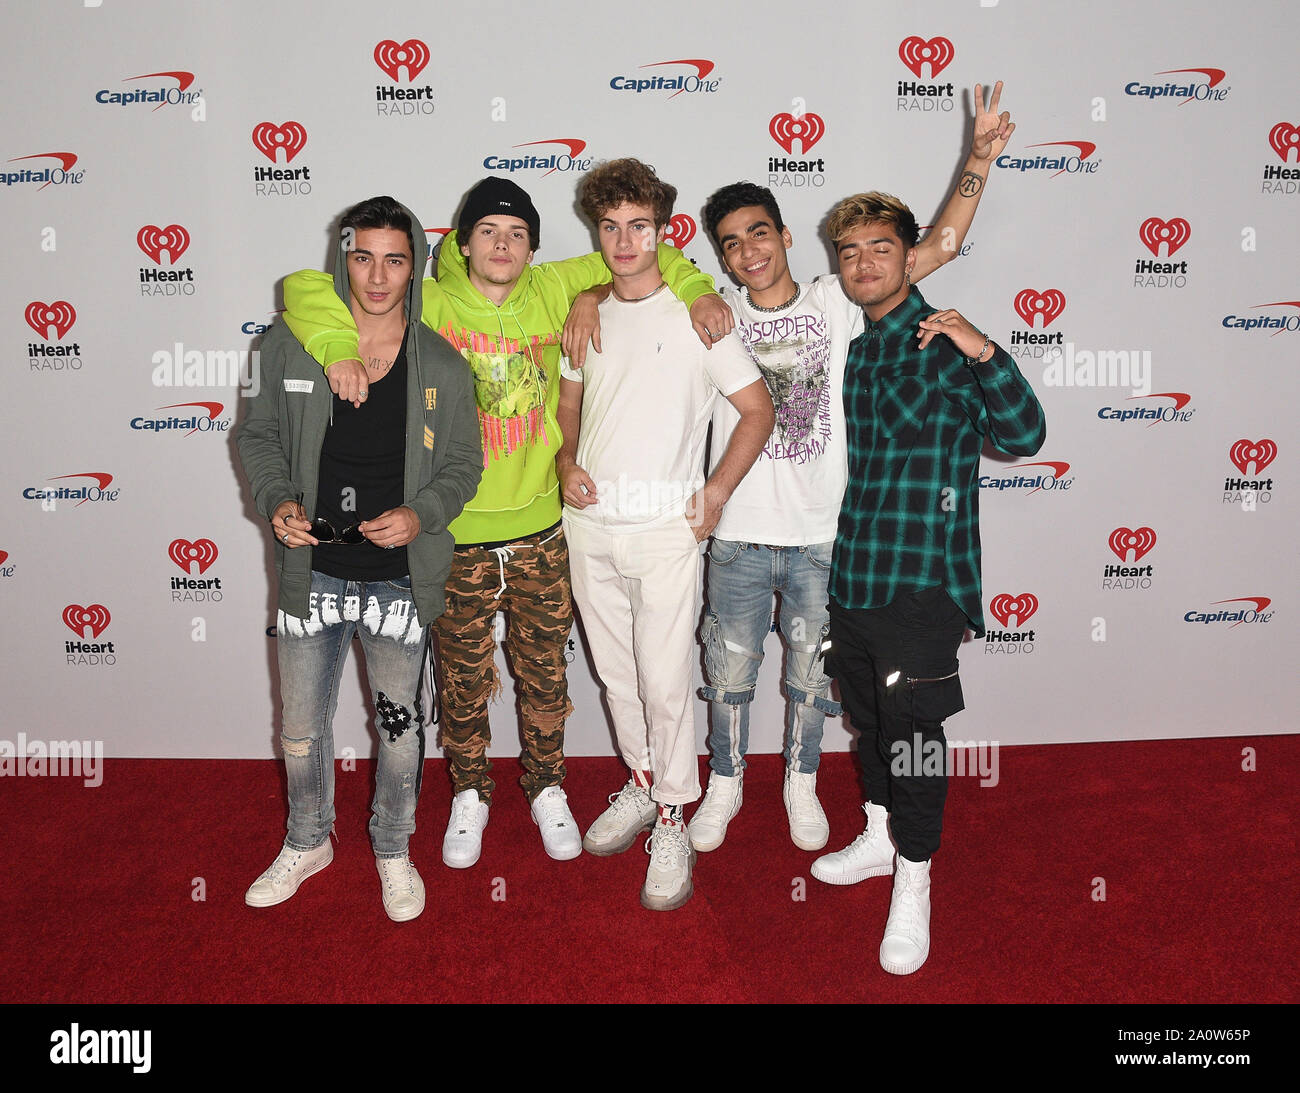 LAS VEGAS, NV - SEPTEMBER 21: Brady Tutton, Sergio Calderon, Drew Ramos, Chance Perez and Michael Conor of In Real Life attend the iHeartRadio Music Festival at T-Mobile Arena on September 21, 2019 in Las Vegas, Nevada. Photo: imageSPACE/MediaPunch Stock Photo